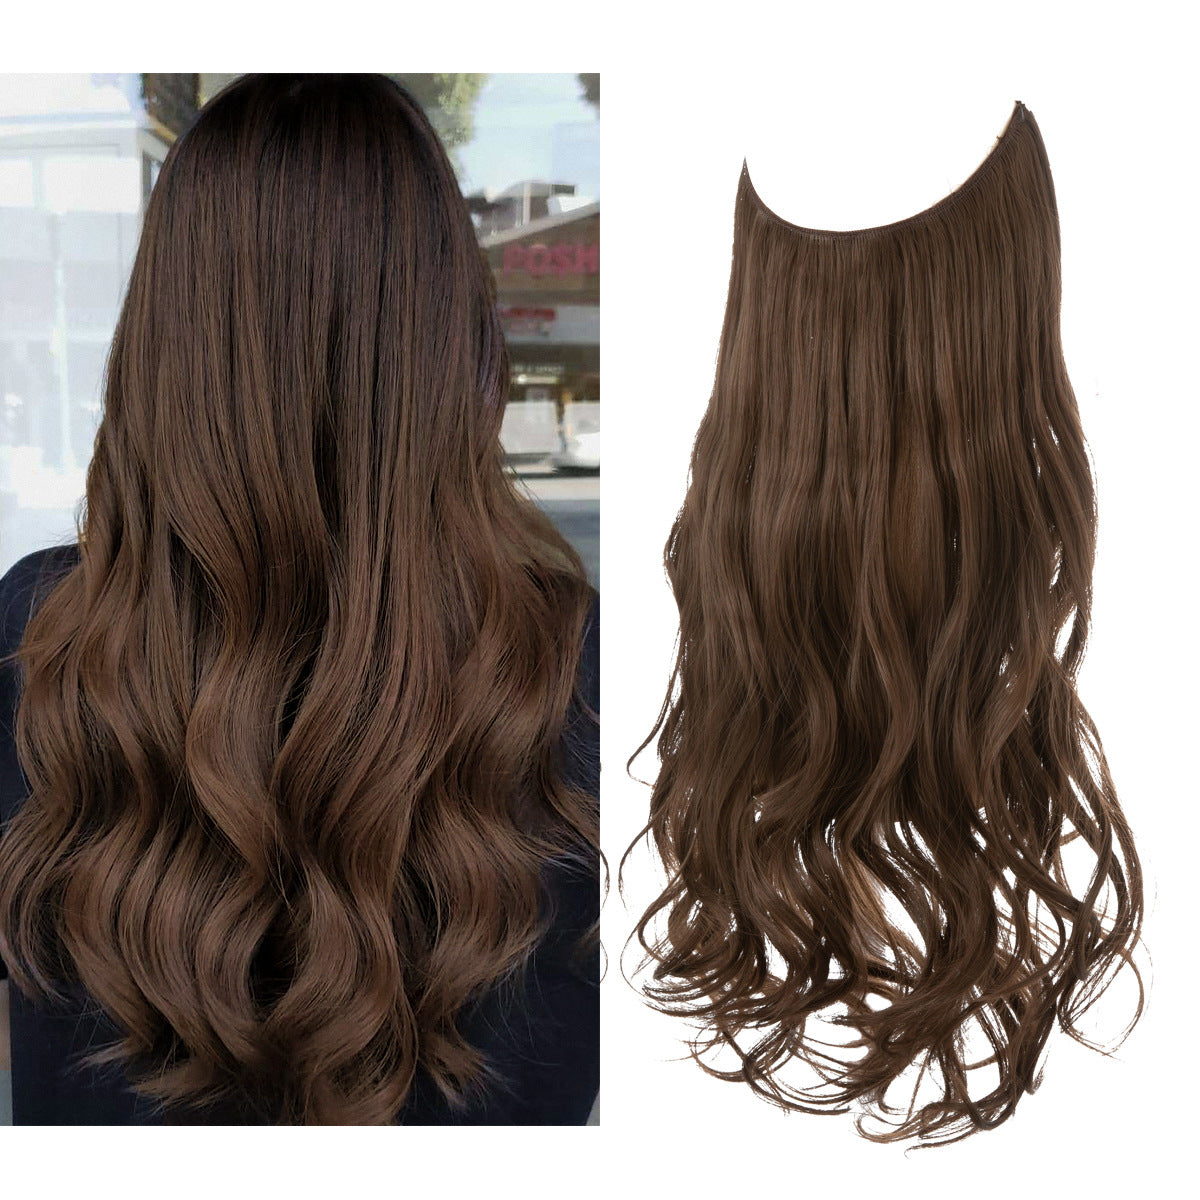 Wig Female Extension Chemical Fiber Long Curly Hair Thread Wig Set